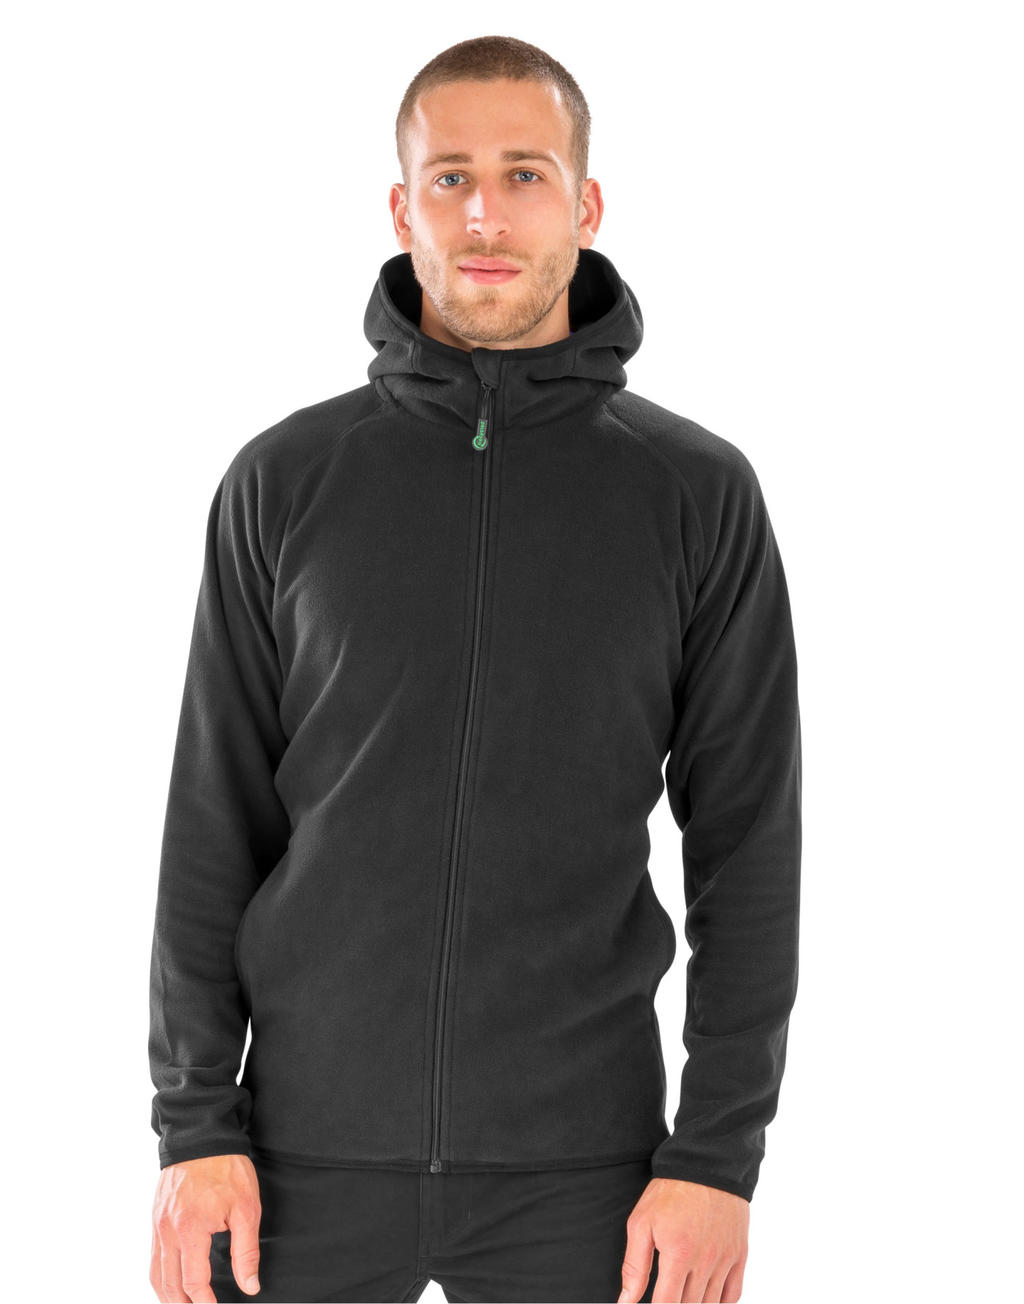  Hooded Recycled Microfleece Jacket in Farbe Black